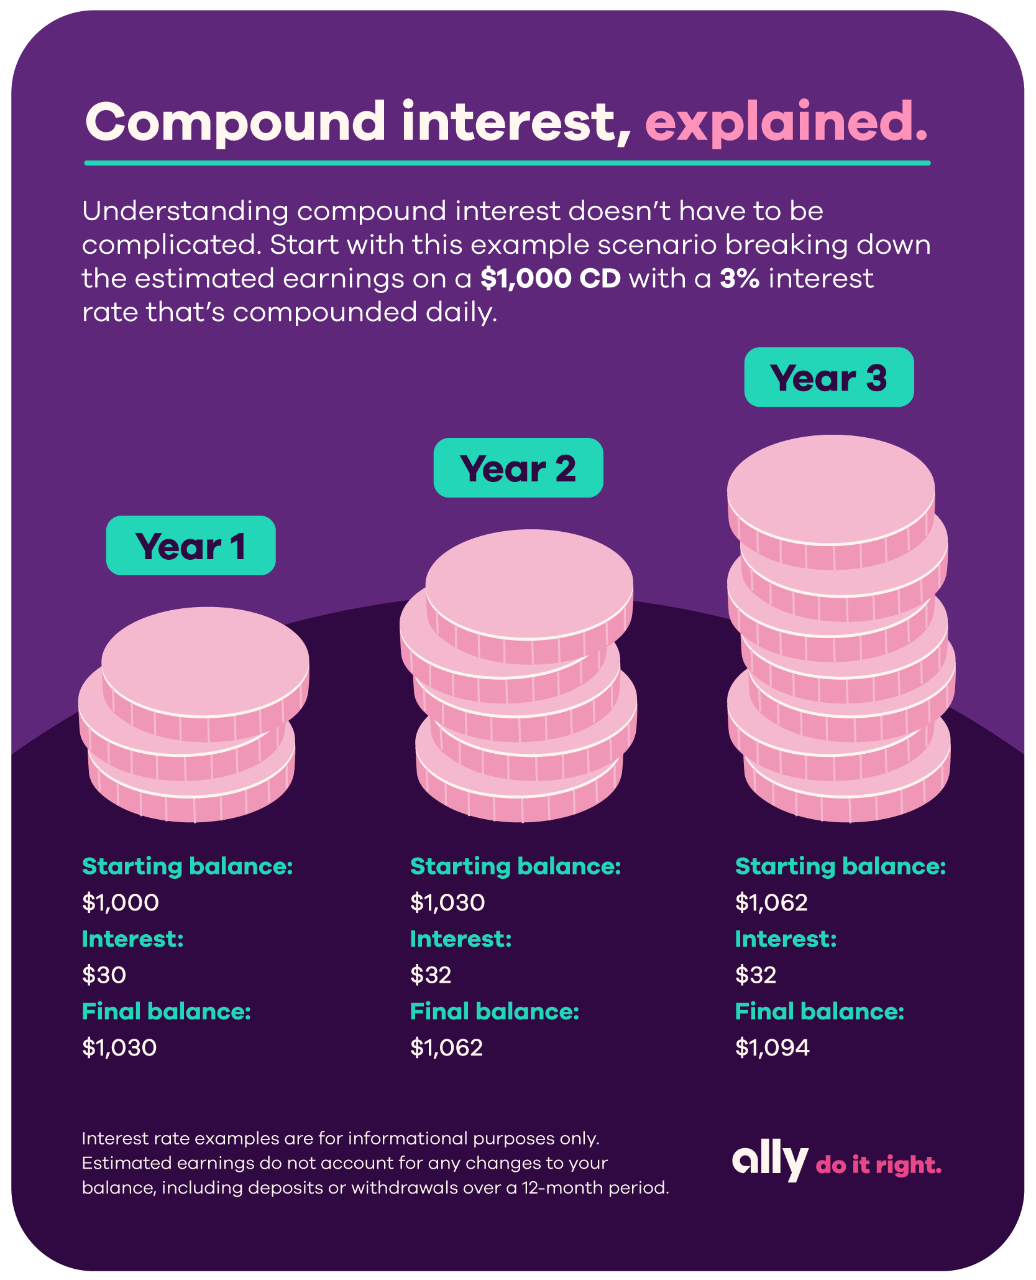 Infographic reading: Compound interest, explained. Understanding compound interest doesn't have to be complicated. Start with this example scenario breaking down the estimated earnings on a $1,000 CD with a 3% interest rather that's compounded daily. Year 1 - starting balance: $1,000, interest: $30, final balance: $1,030. Year 2 - starting balance: $1,030, interest: $32, final balance: $1,062. Year 3 - starting balance: $1,062, interest: $32, final balance: $1,094. (Interest rate examples are for the informational purposes only. Estimated earnings do not account for any changes to your balance, including deposits or withdrawal over a 12-month period.